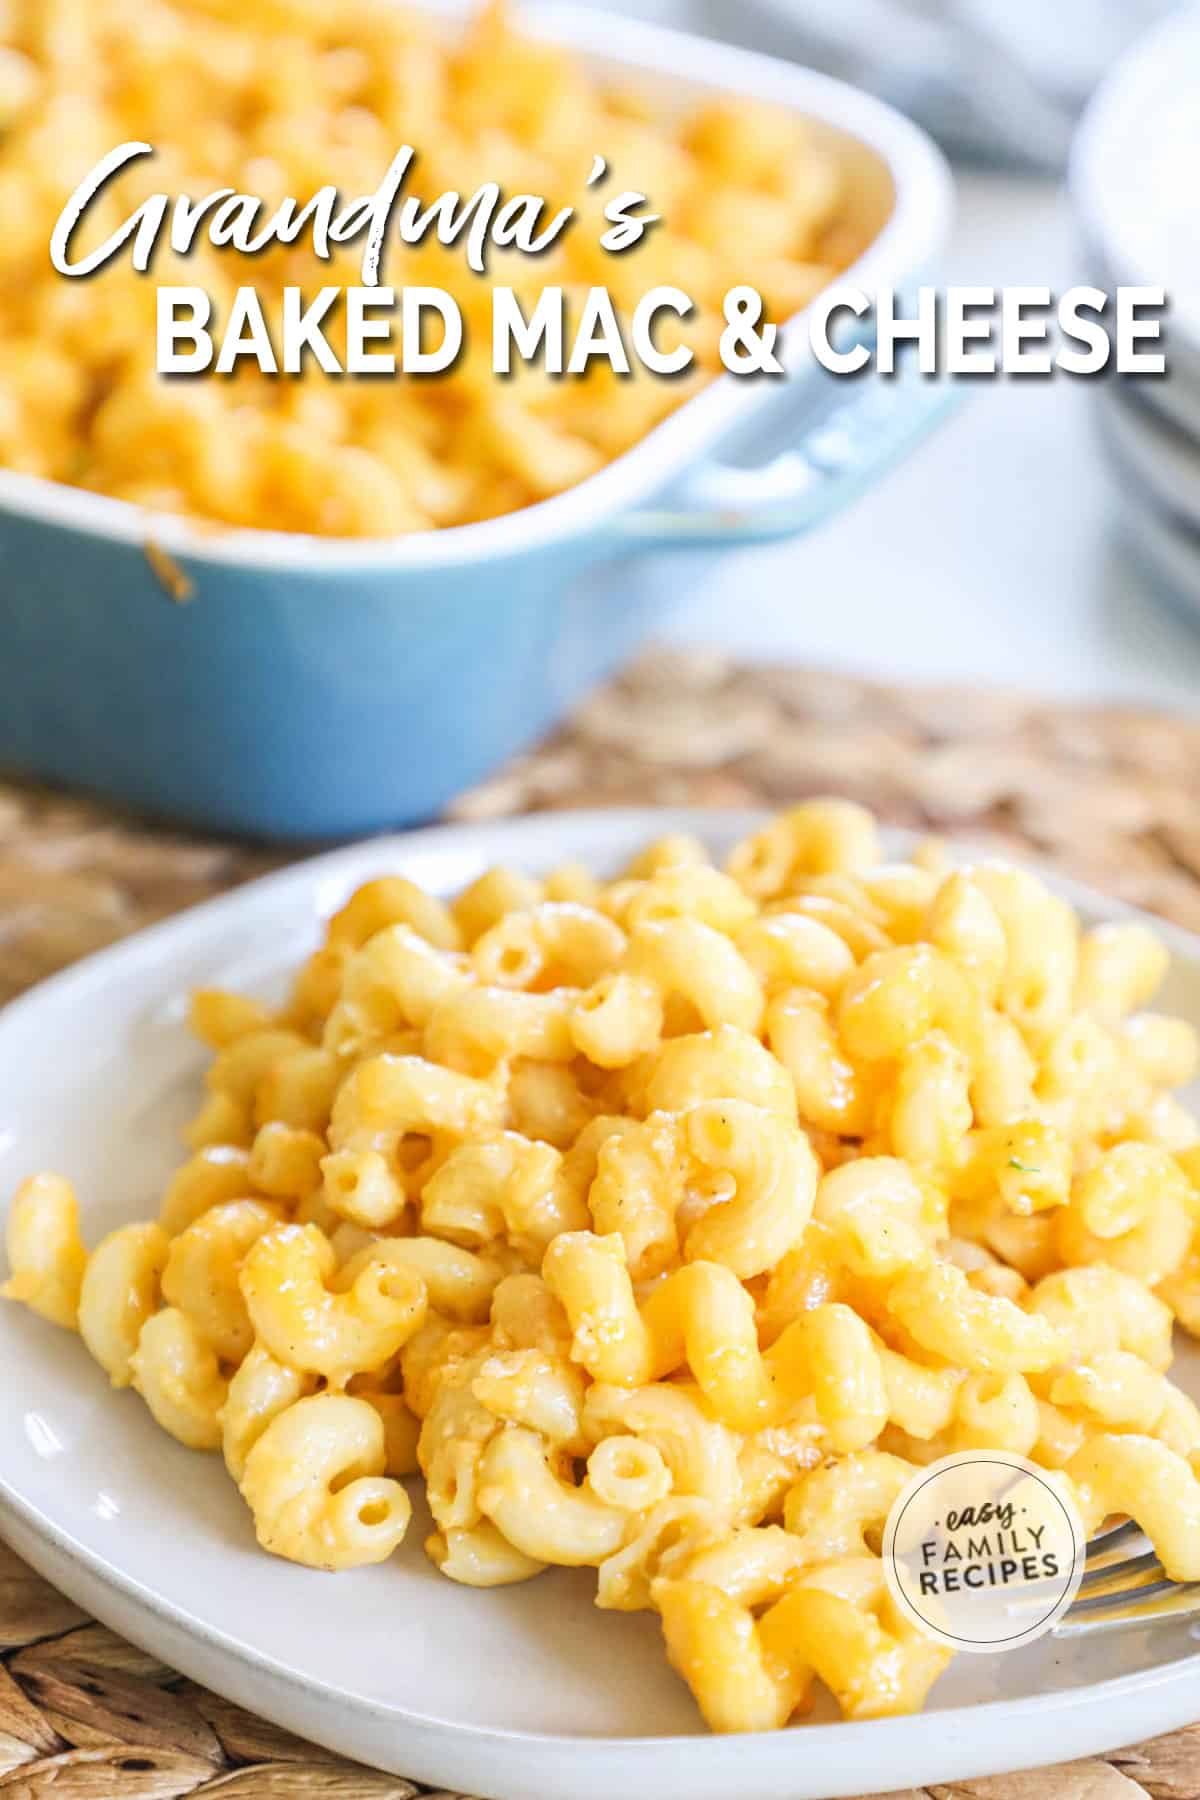 Mac and cheese on a plate next to a casserole dish of mac and cheese.